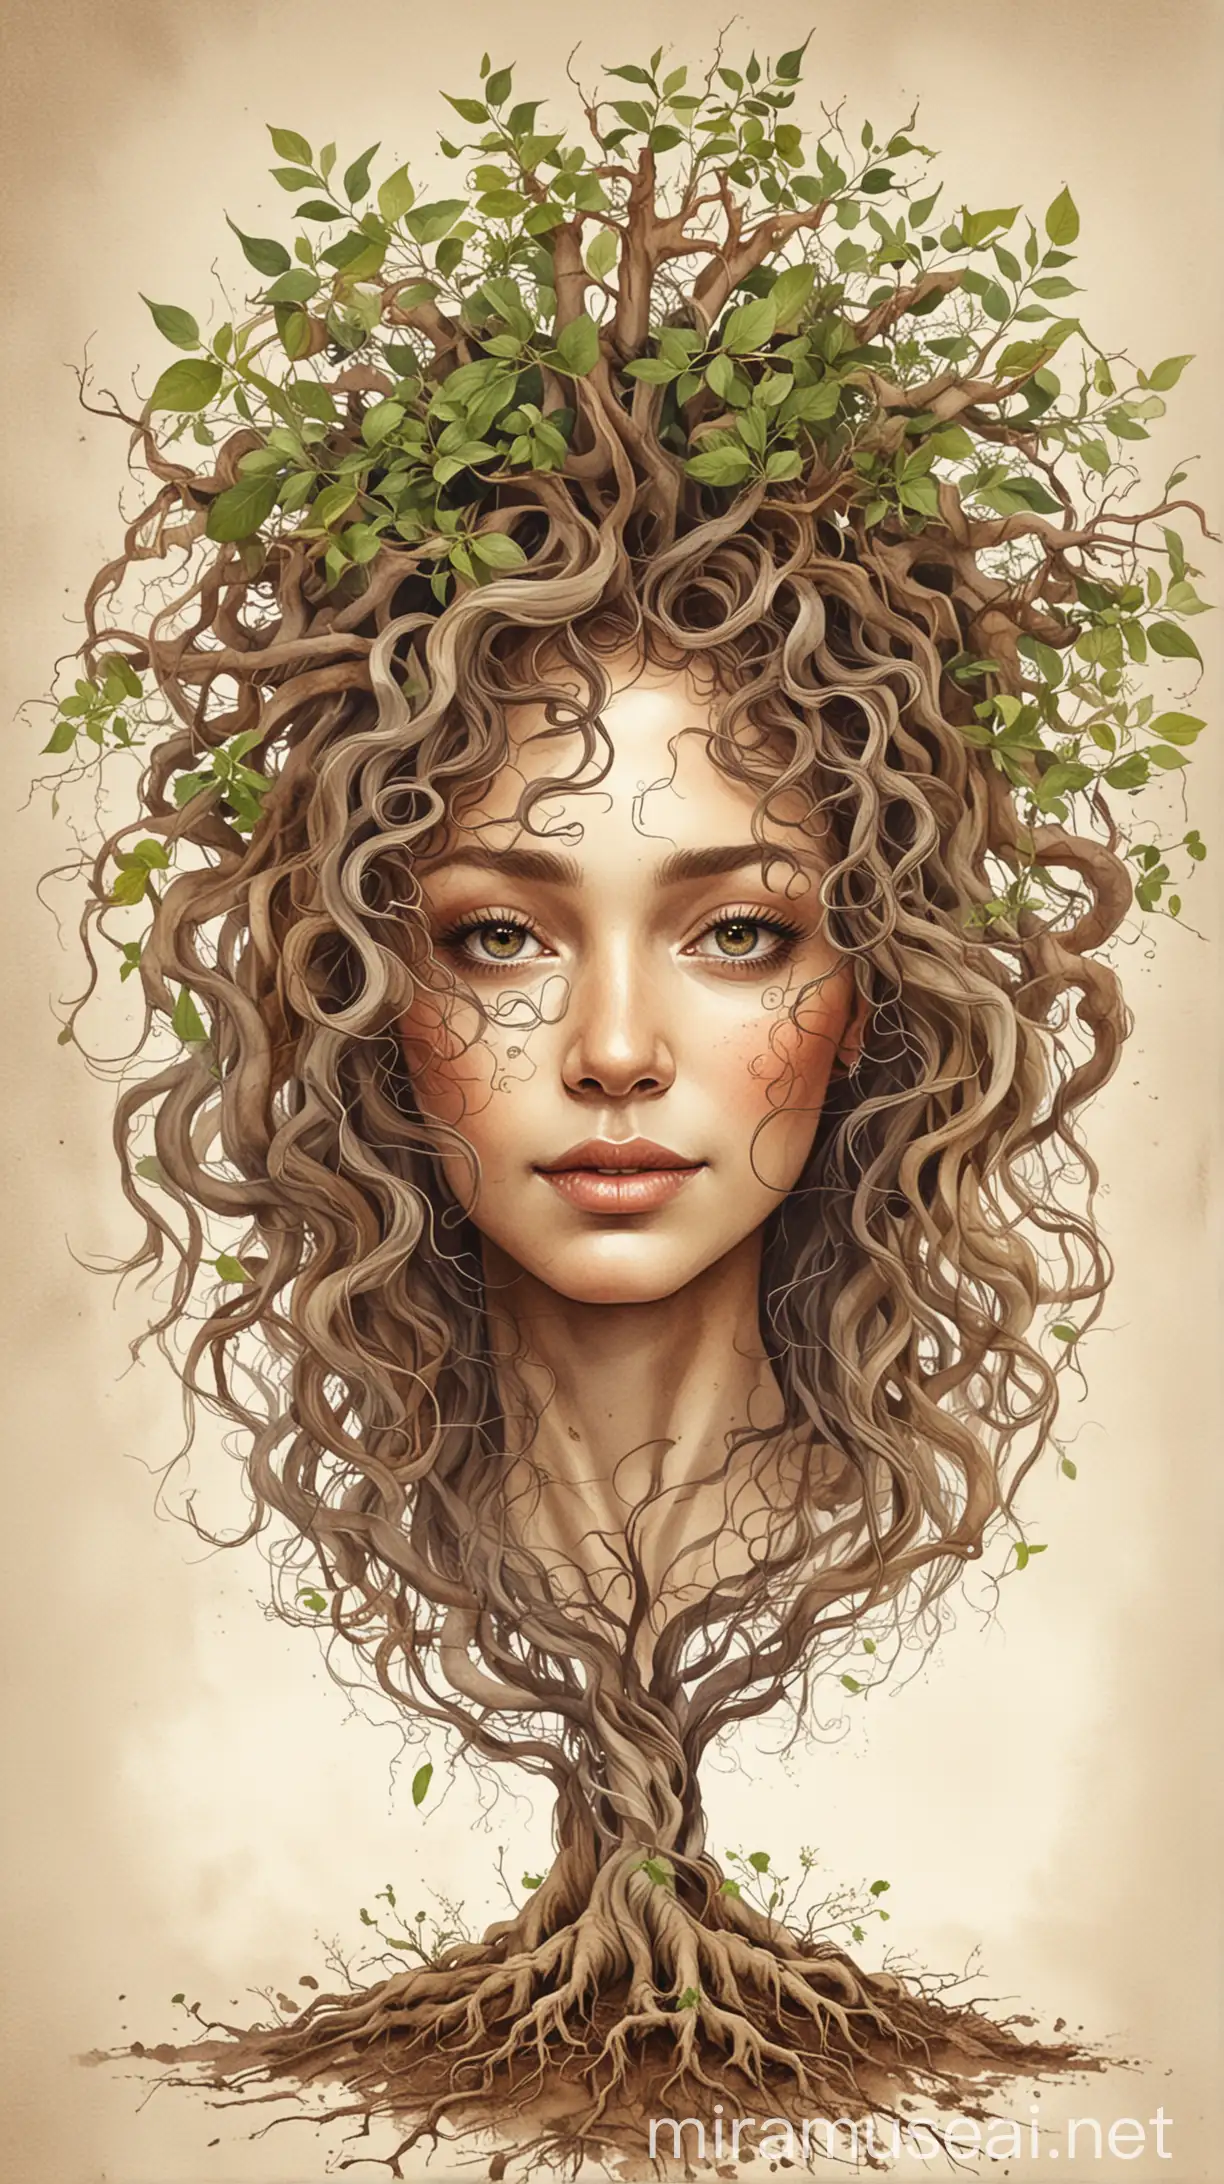 Watercolor Portrait of Mother with Curly Hair Emerging from Earth